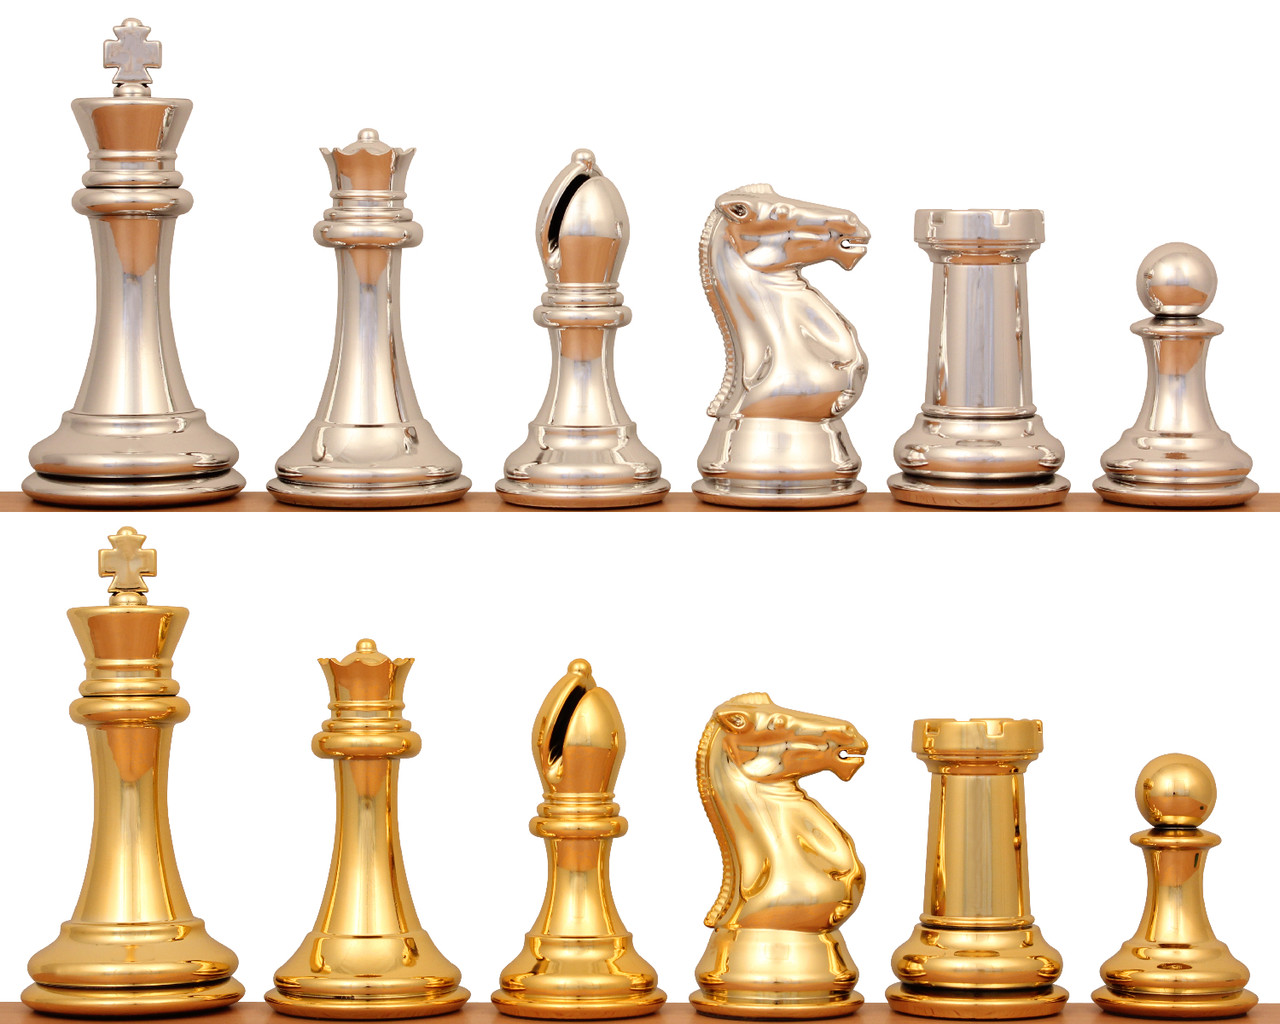 Large Napoleon Theme Chess Set with Brass & Nickel Pieces by Italfama